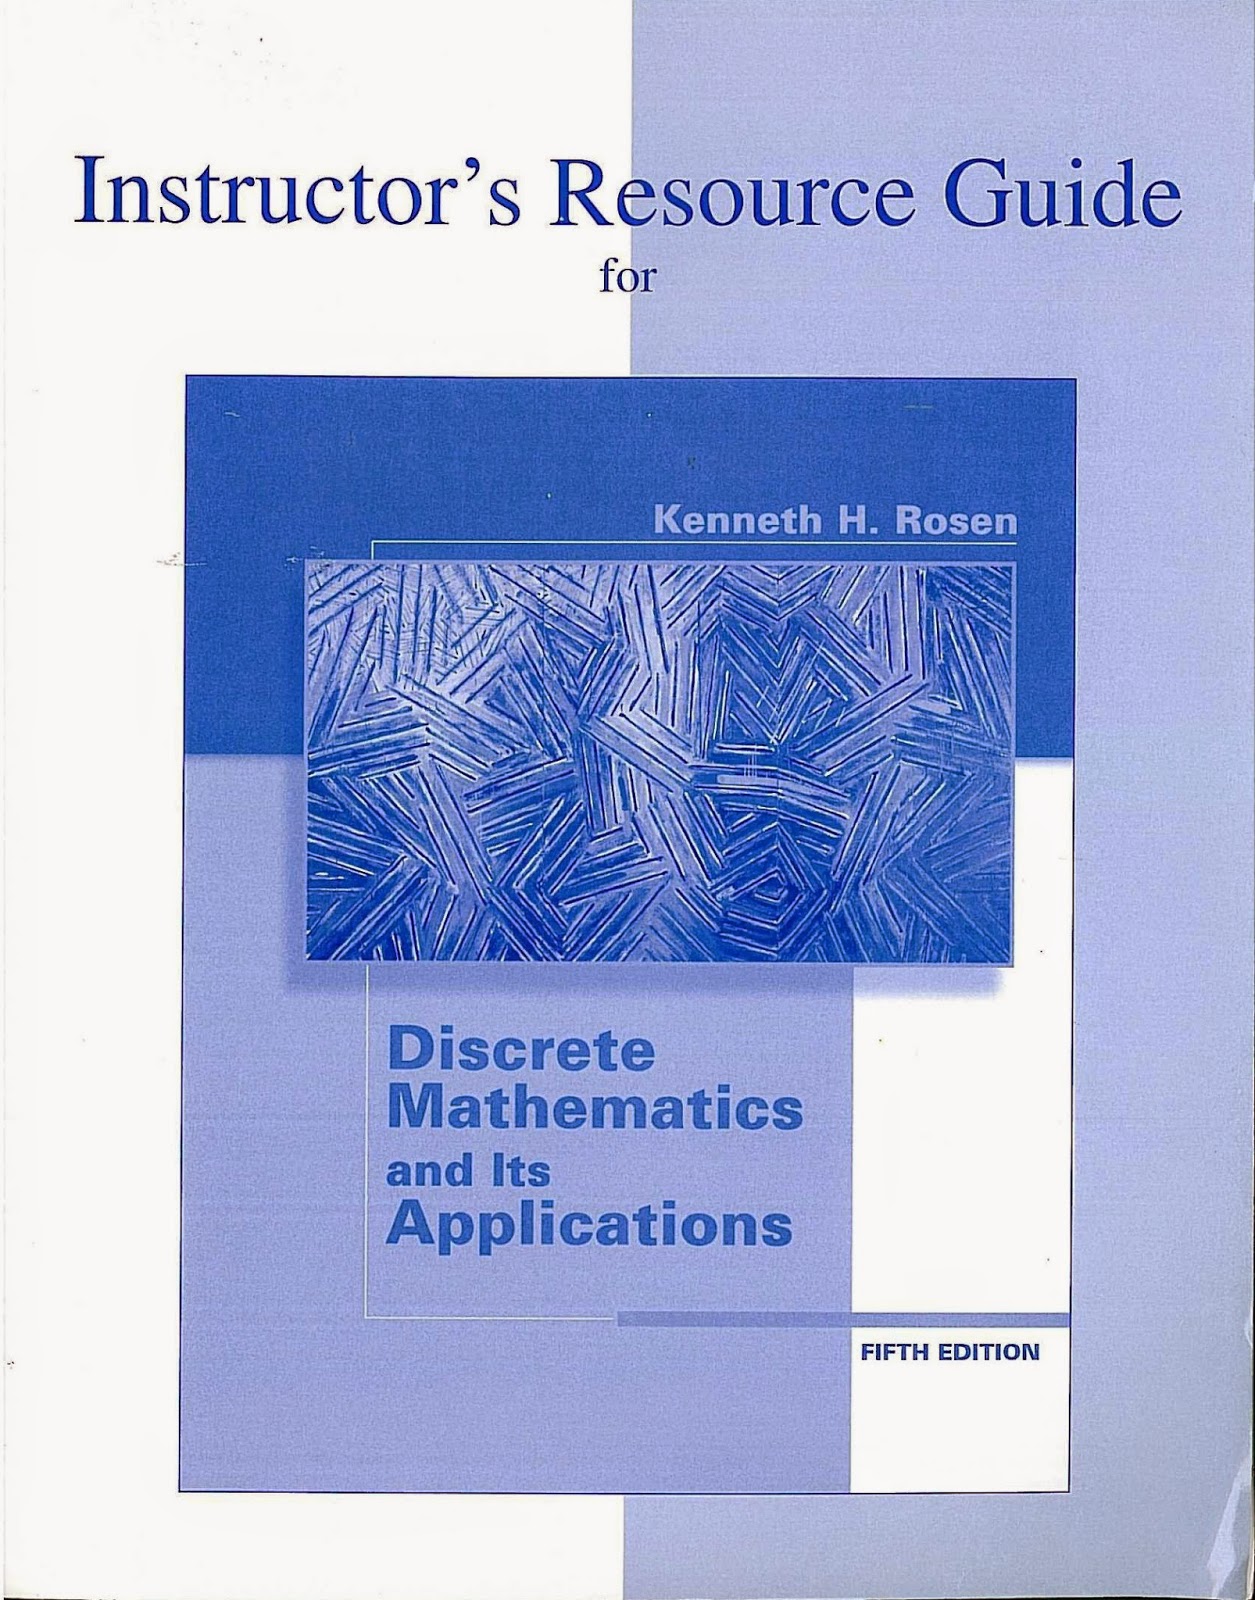 Discrete Mathematics and Its Applications Solution Manual 5th Edition By Kennenth H.Rosen